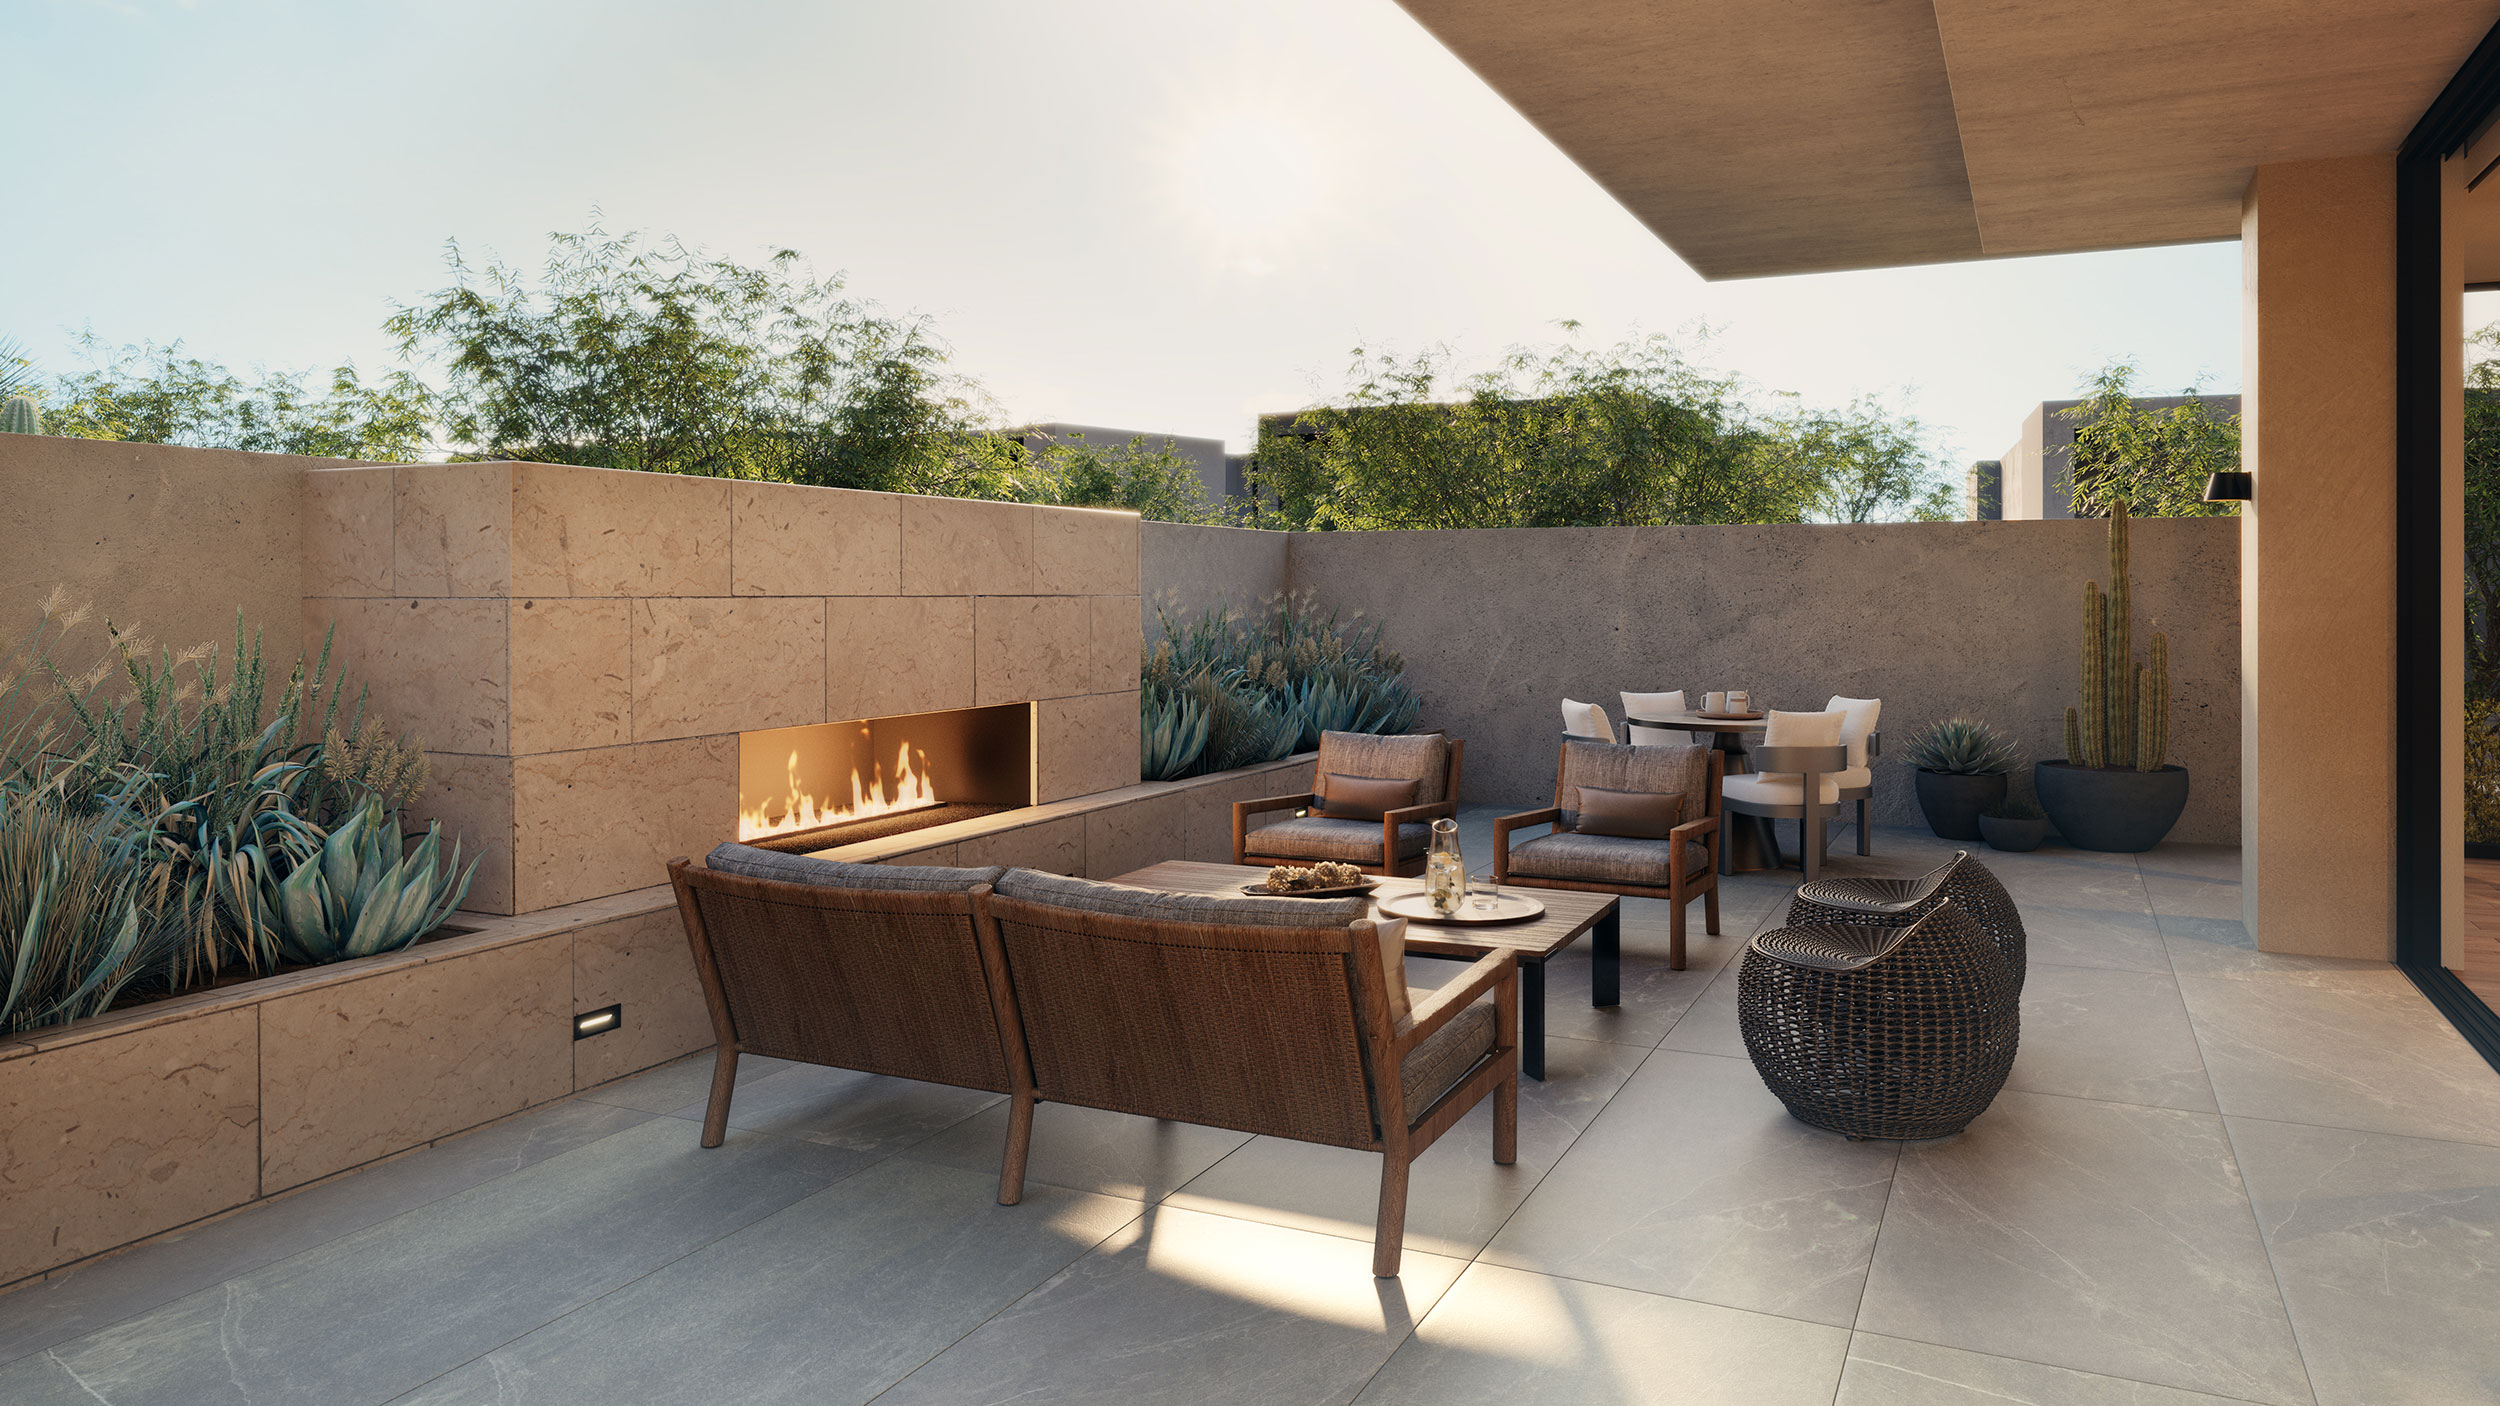 Outdoor living and dining areas receive partial cover from the sun.